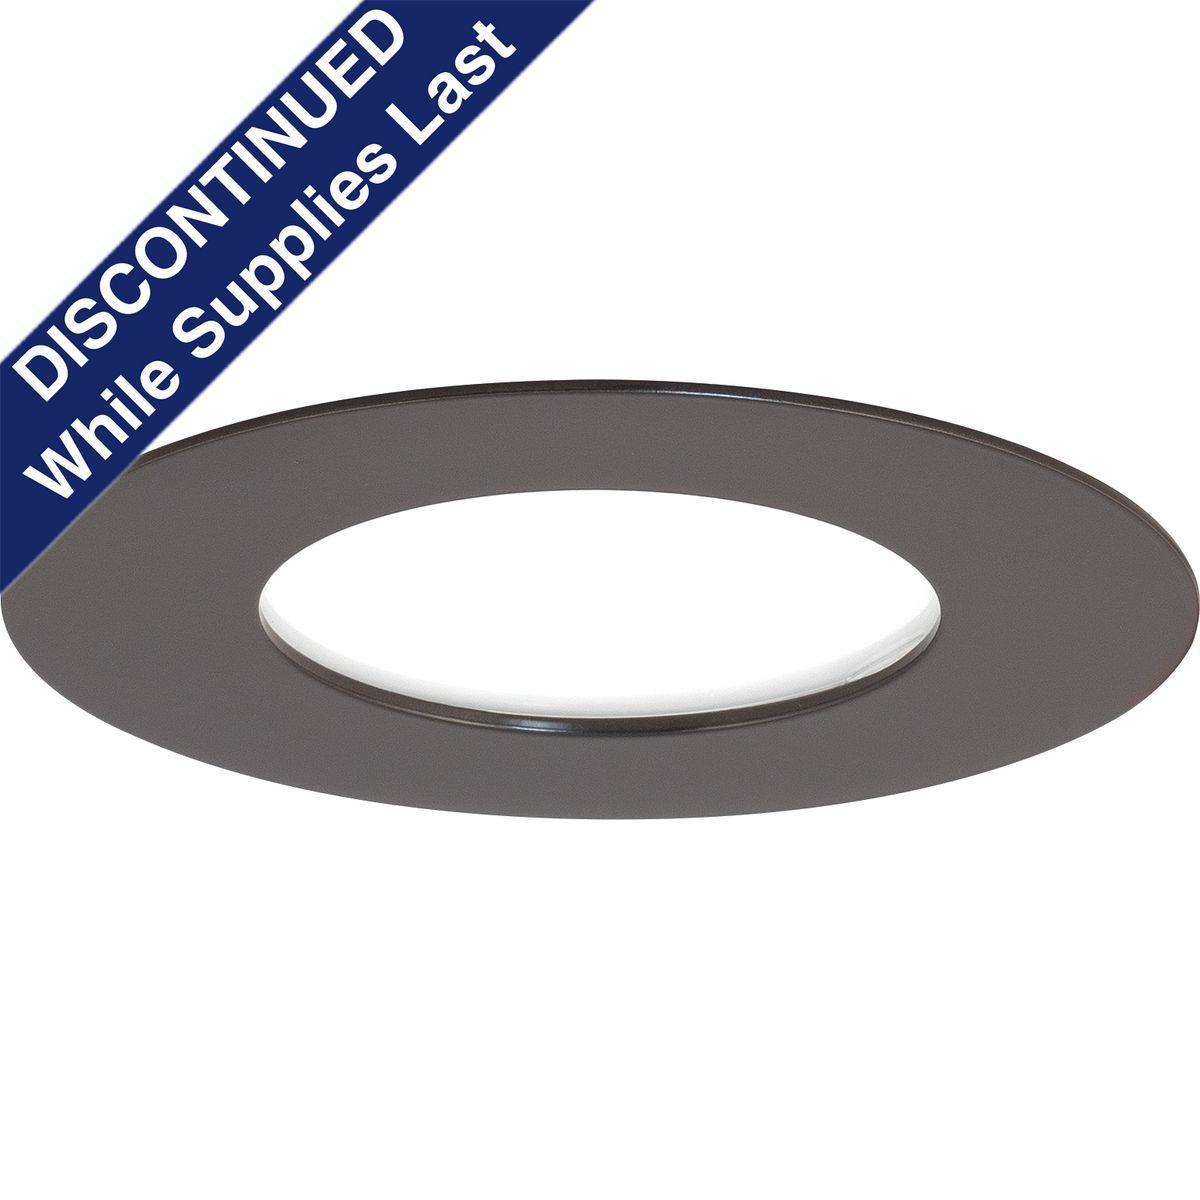 Hubbell P800004-020-30 5" Slim, low profile recessed downlight combines innovative technology, aesthetics, functionality and affordability. No housing or J-Box required for installation and wet location listed provides the ultimate flexibility. The low profile downlight is idea